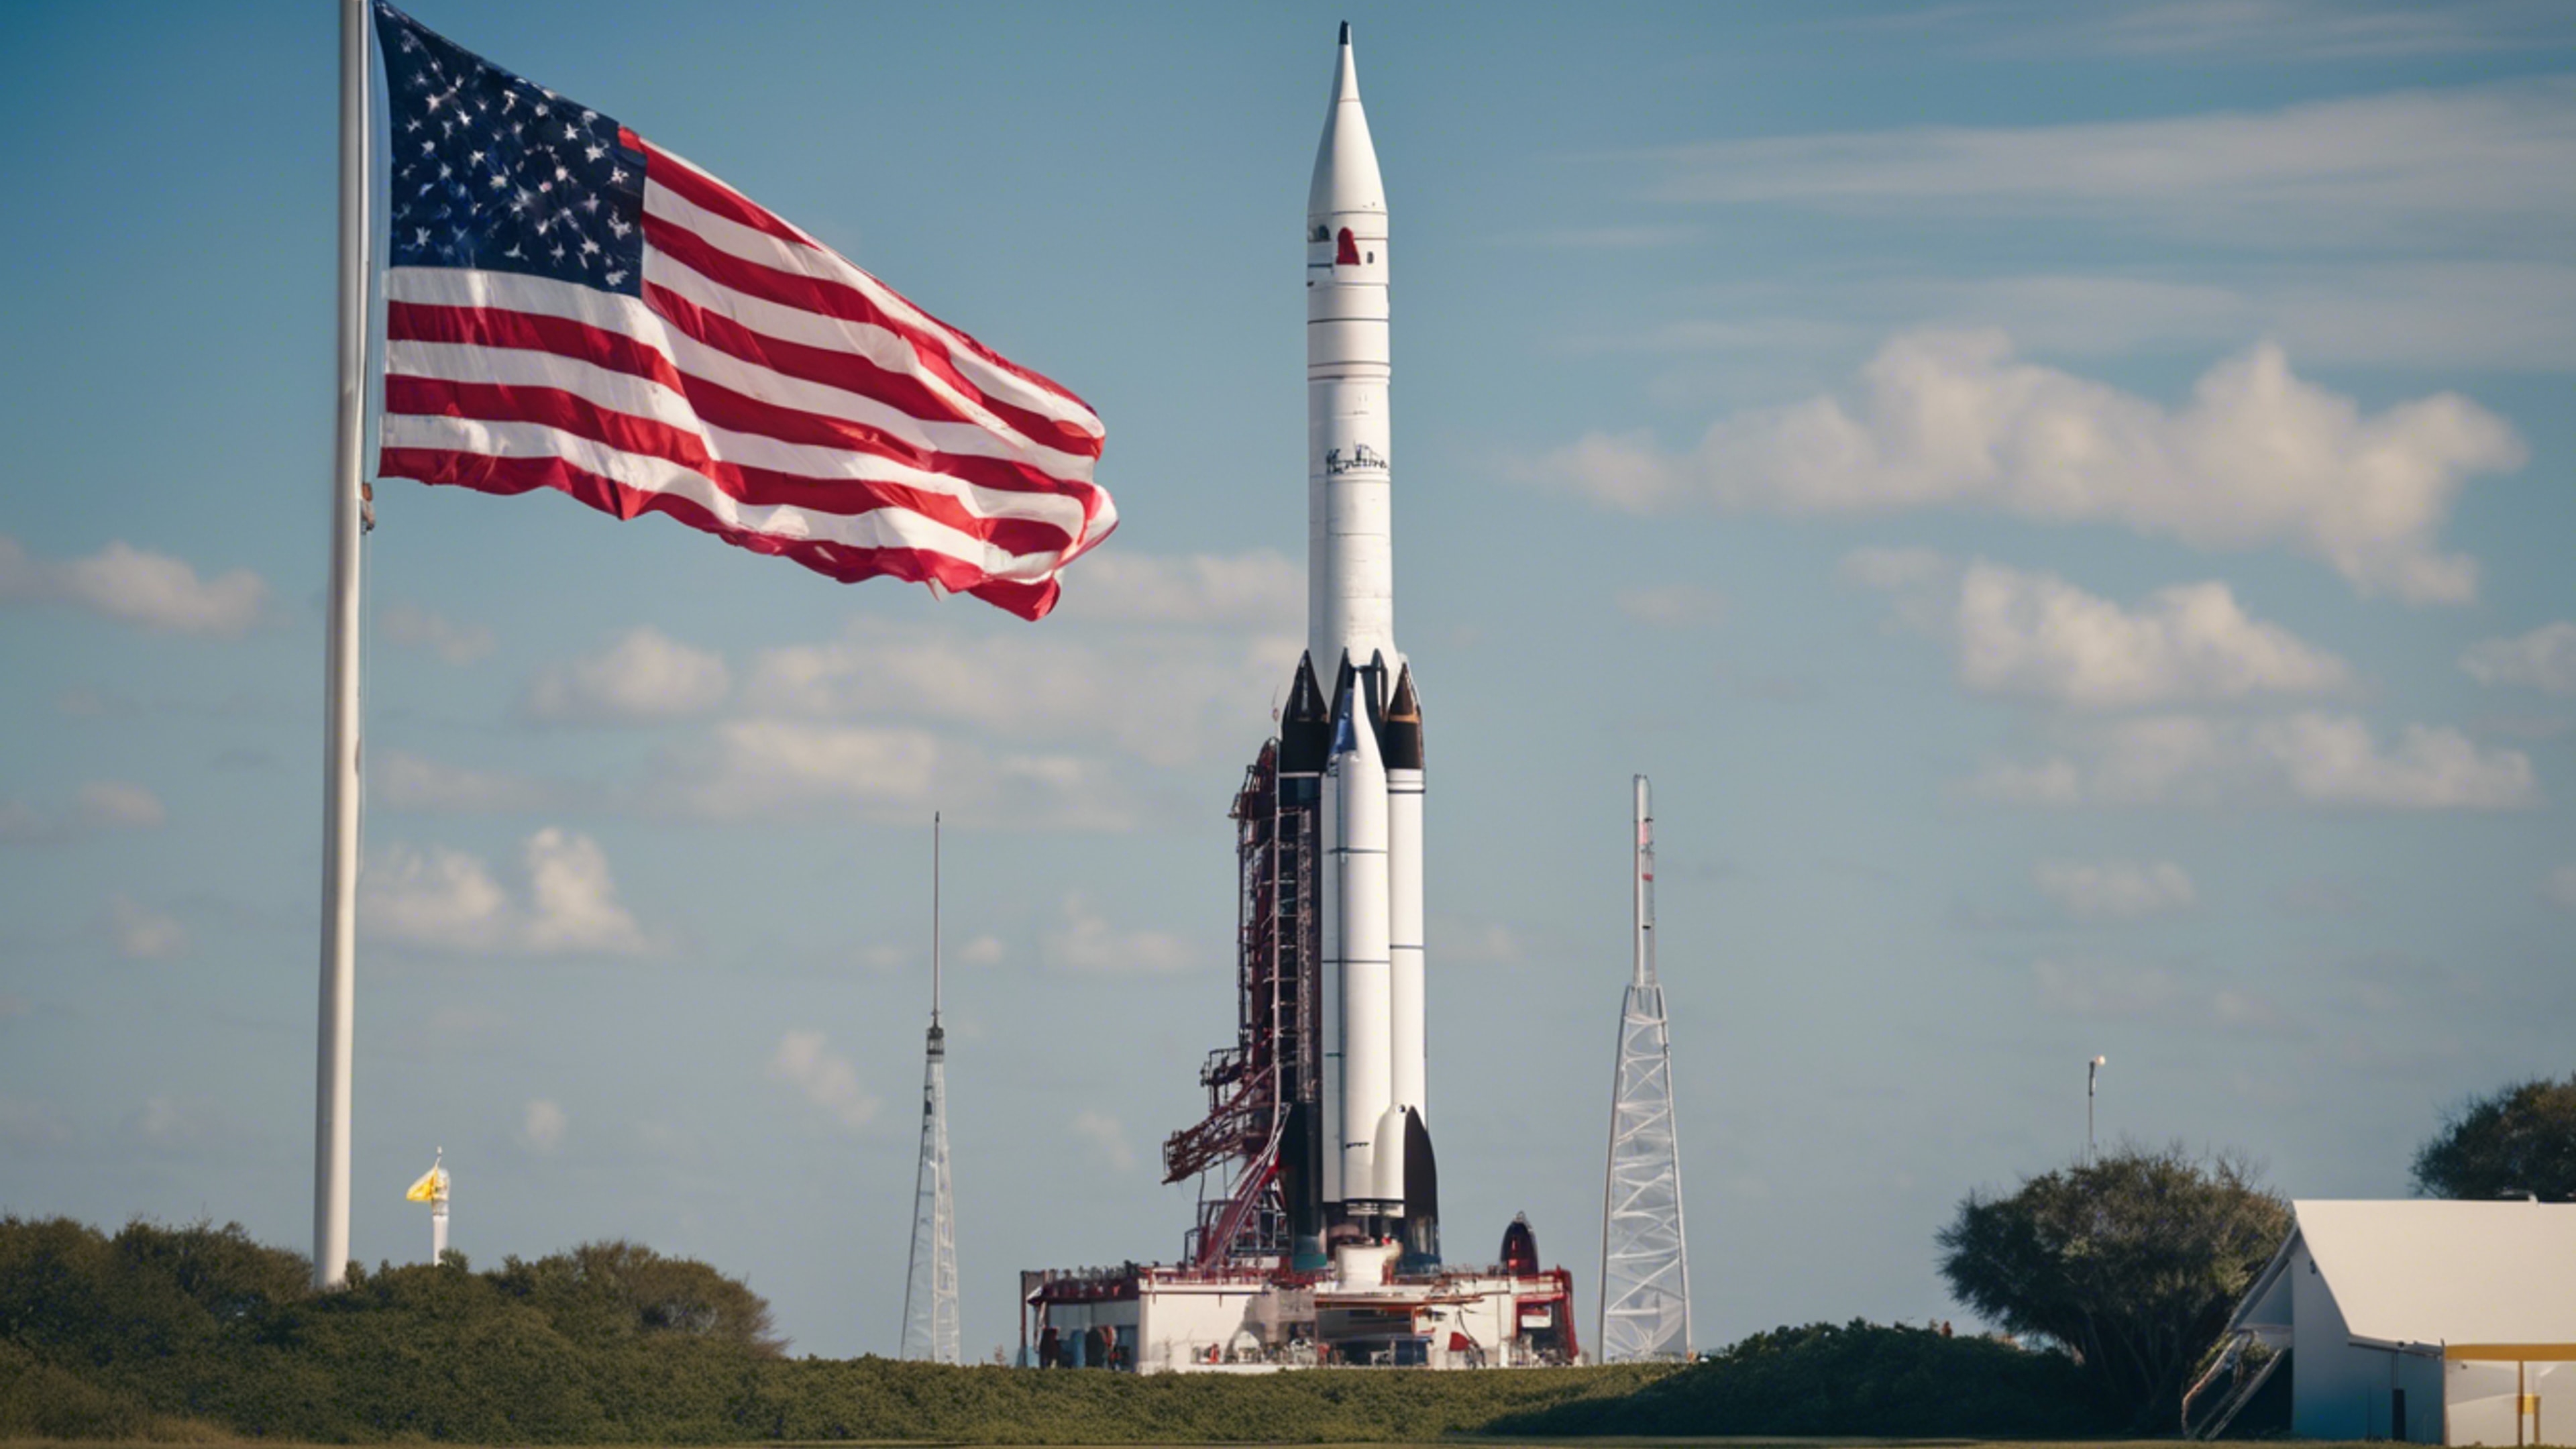 A historic rocket display at Cape Canaveral, with a clear blue sky and the American flag waving in the background. Tapeta[7e3199d5ab33424fb953]